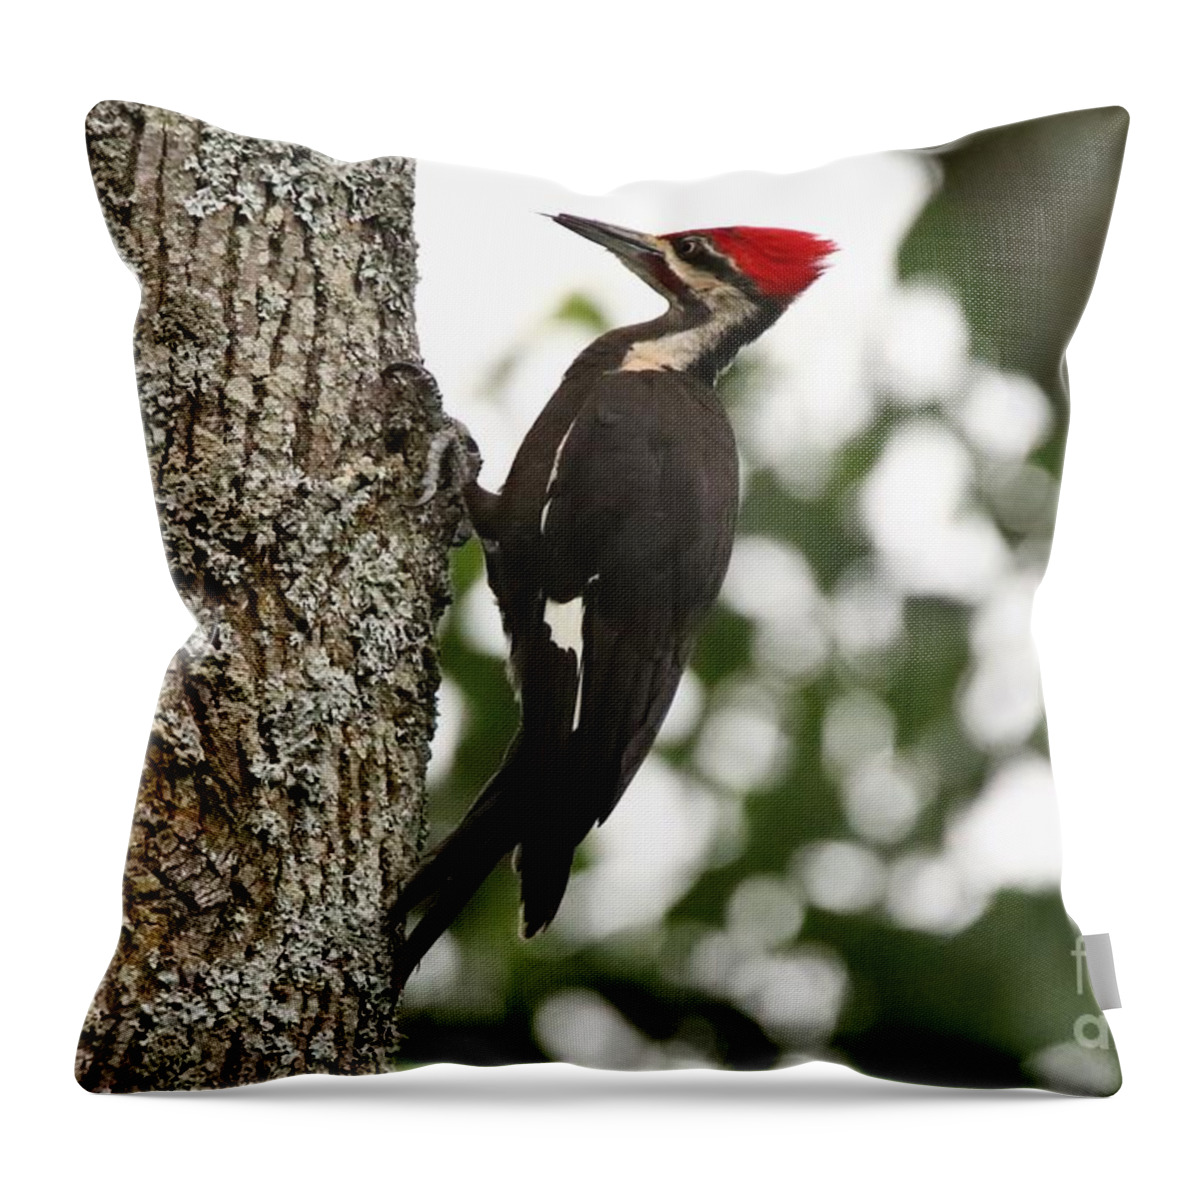  Pileated Woodpecker Throw Pillow featuring the photograph Behold the Pileated Woodpecker by Tony Lee